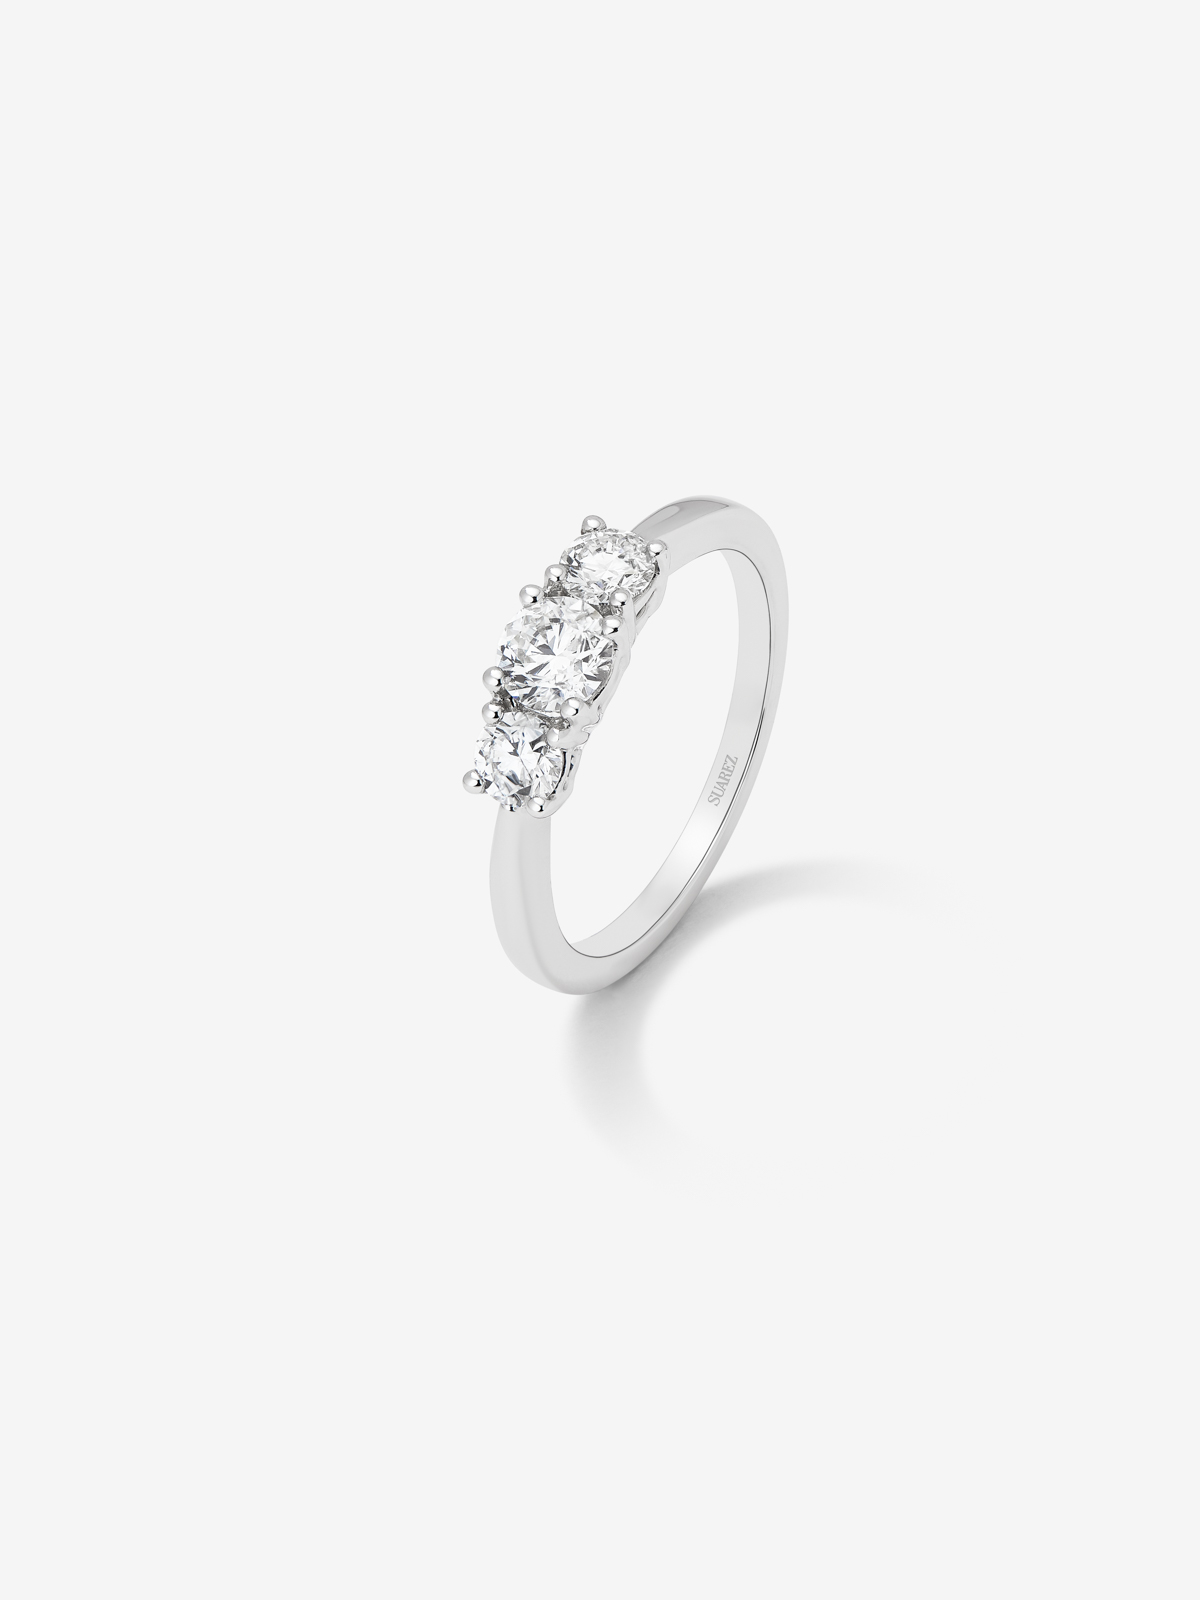 18K White Gold Tiego Ring with white 0.8 cts bright diamonds